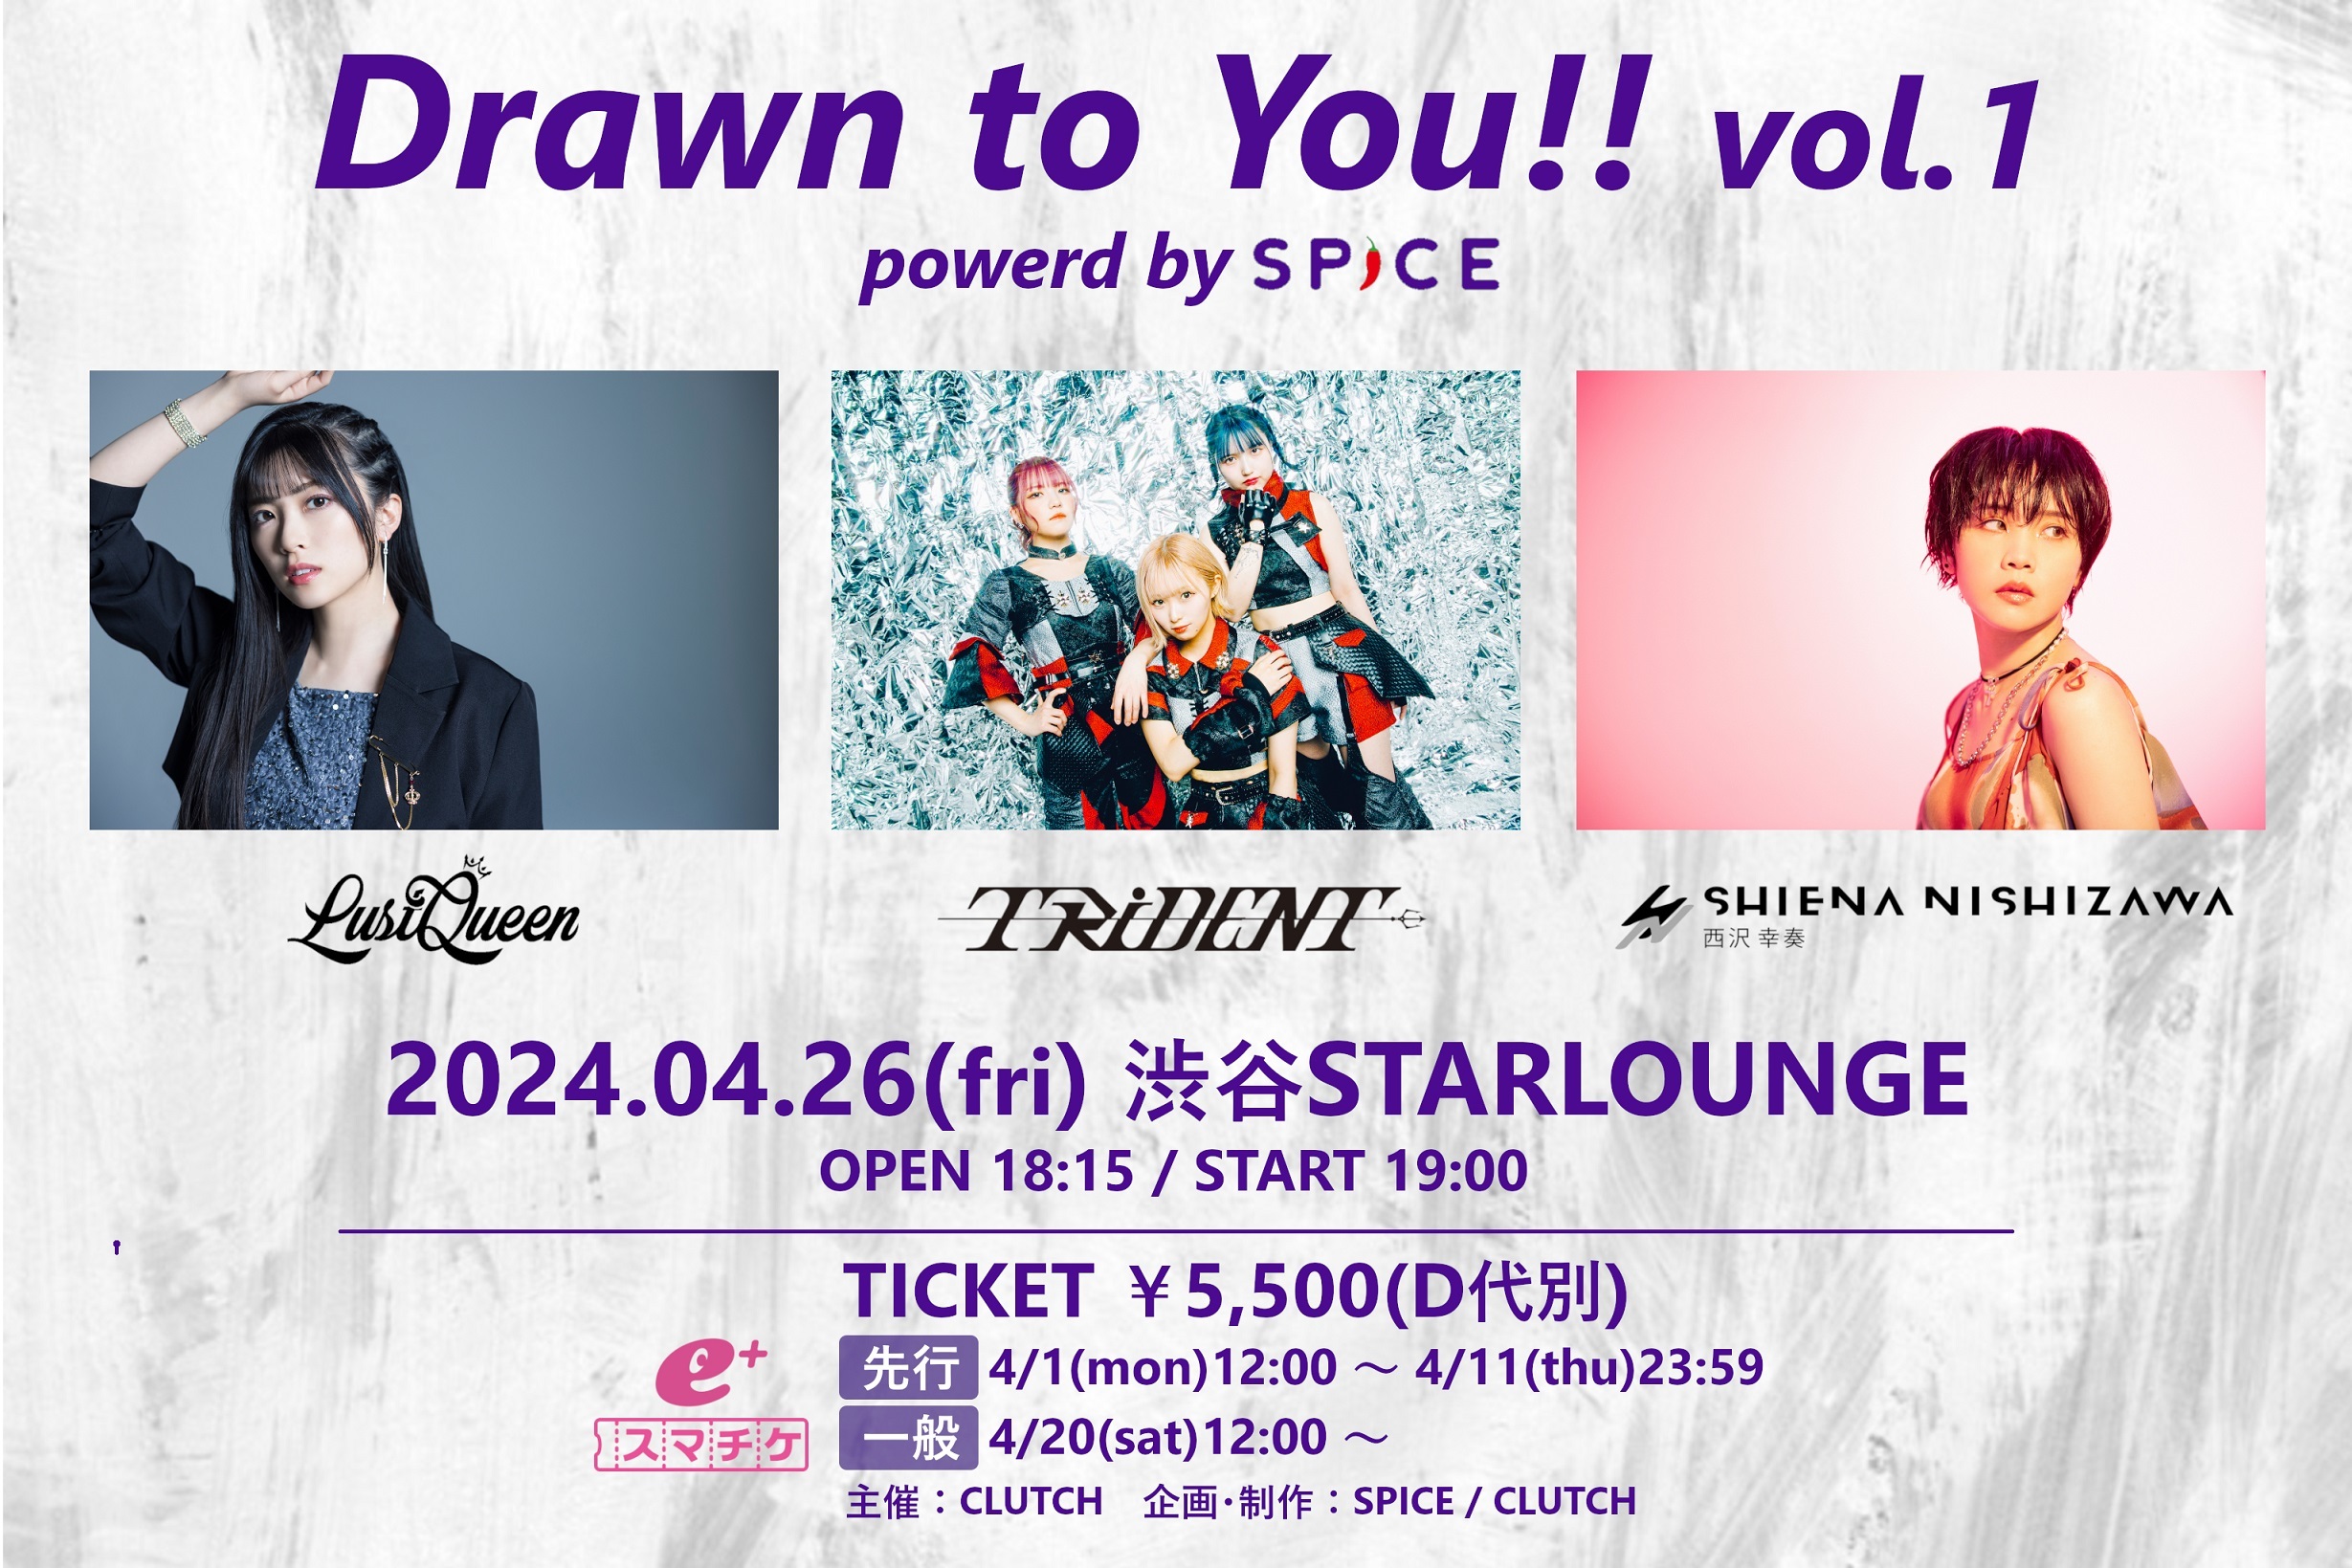 Drawn to You!! vol.1 powerd by SPICE